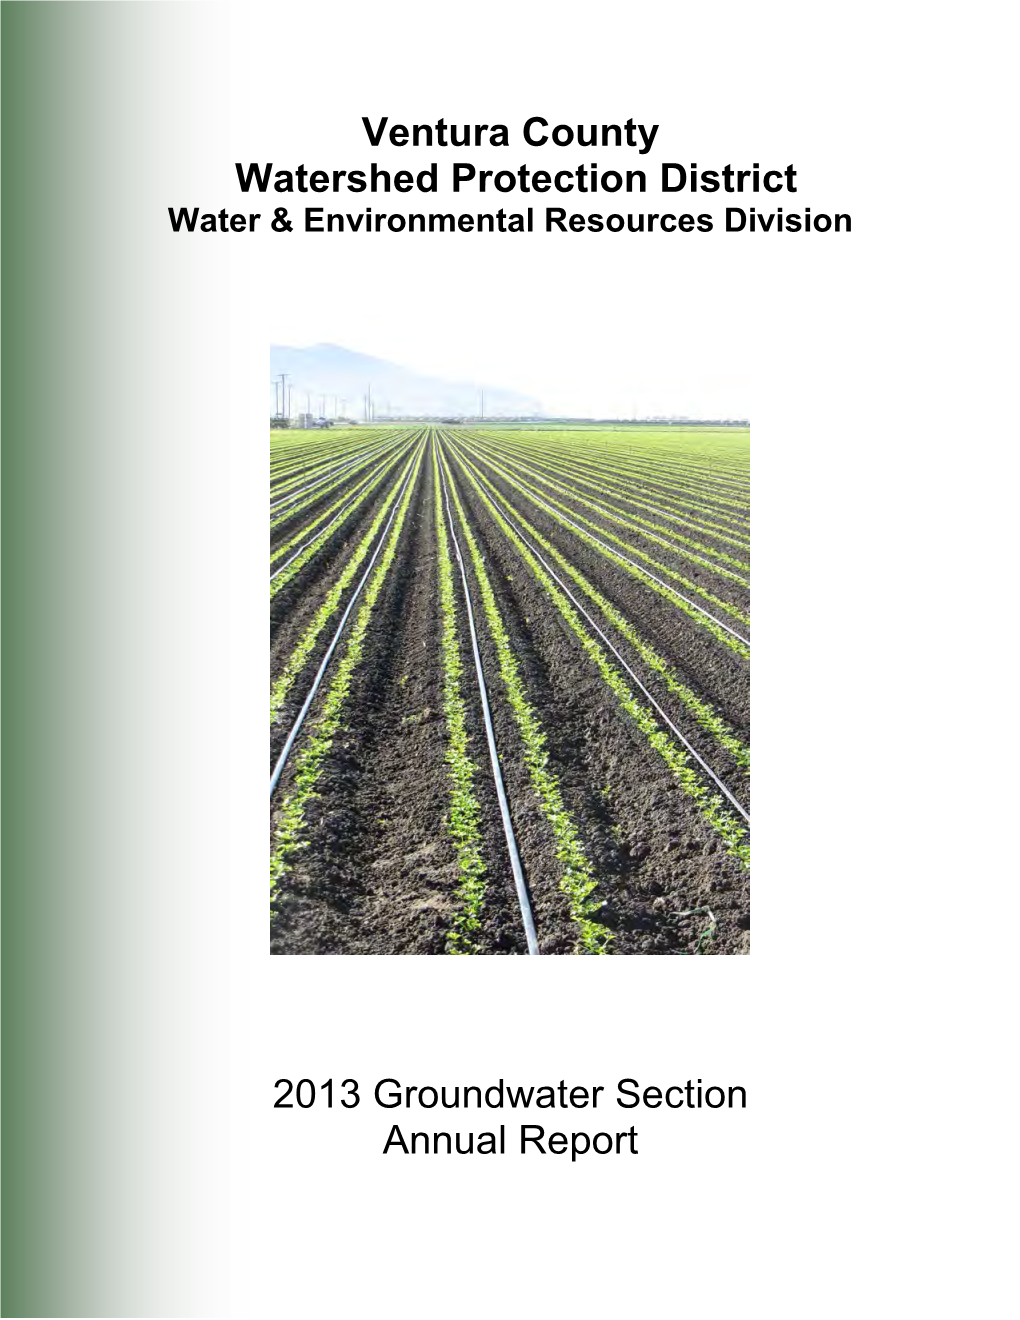 Ventura County Watershed Protection District 2013 Groundwater Section Annual Report